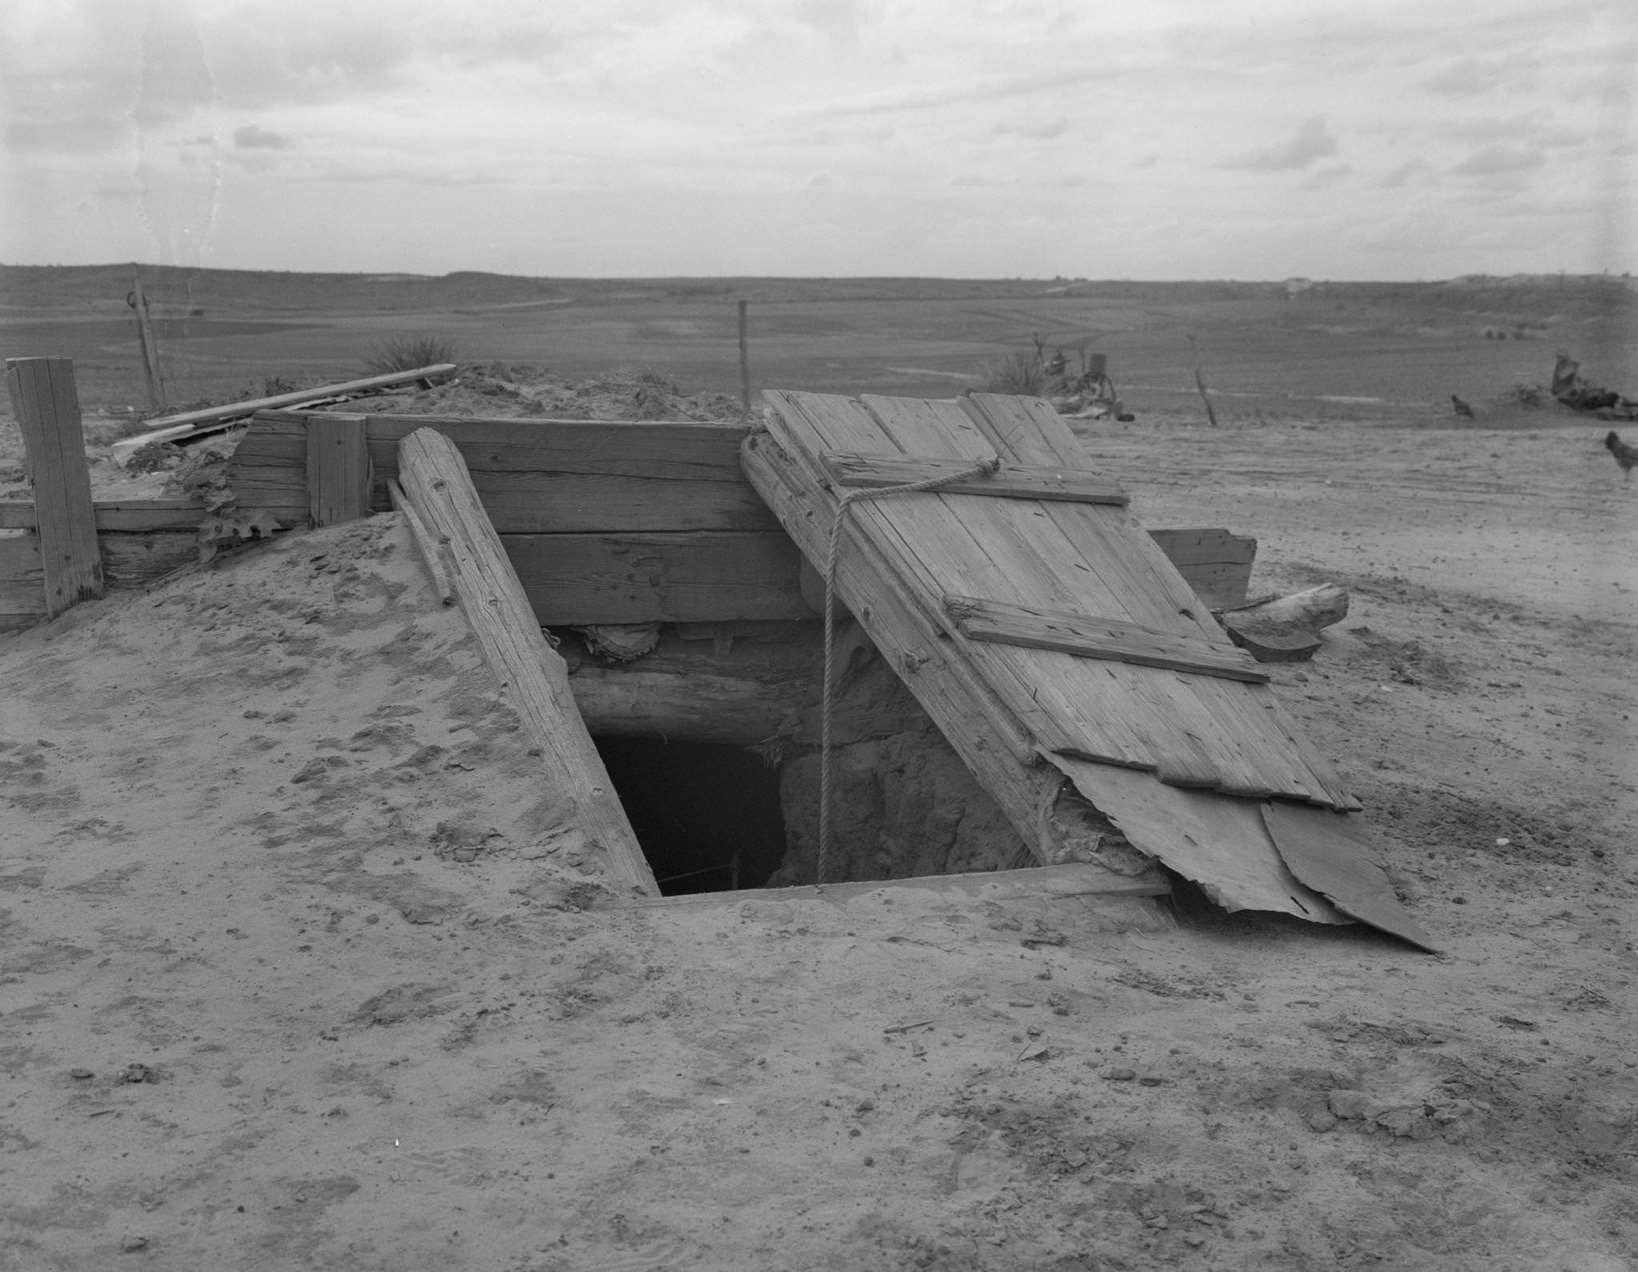 Storm cellar on the Texas plains. West Texas Panhandle, 1934